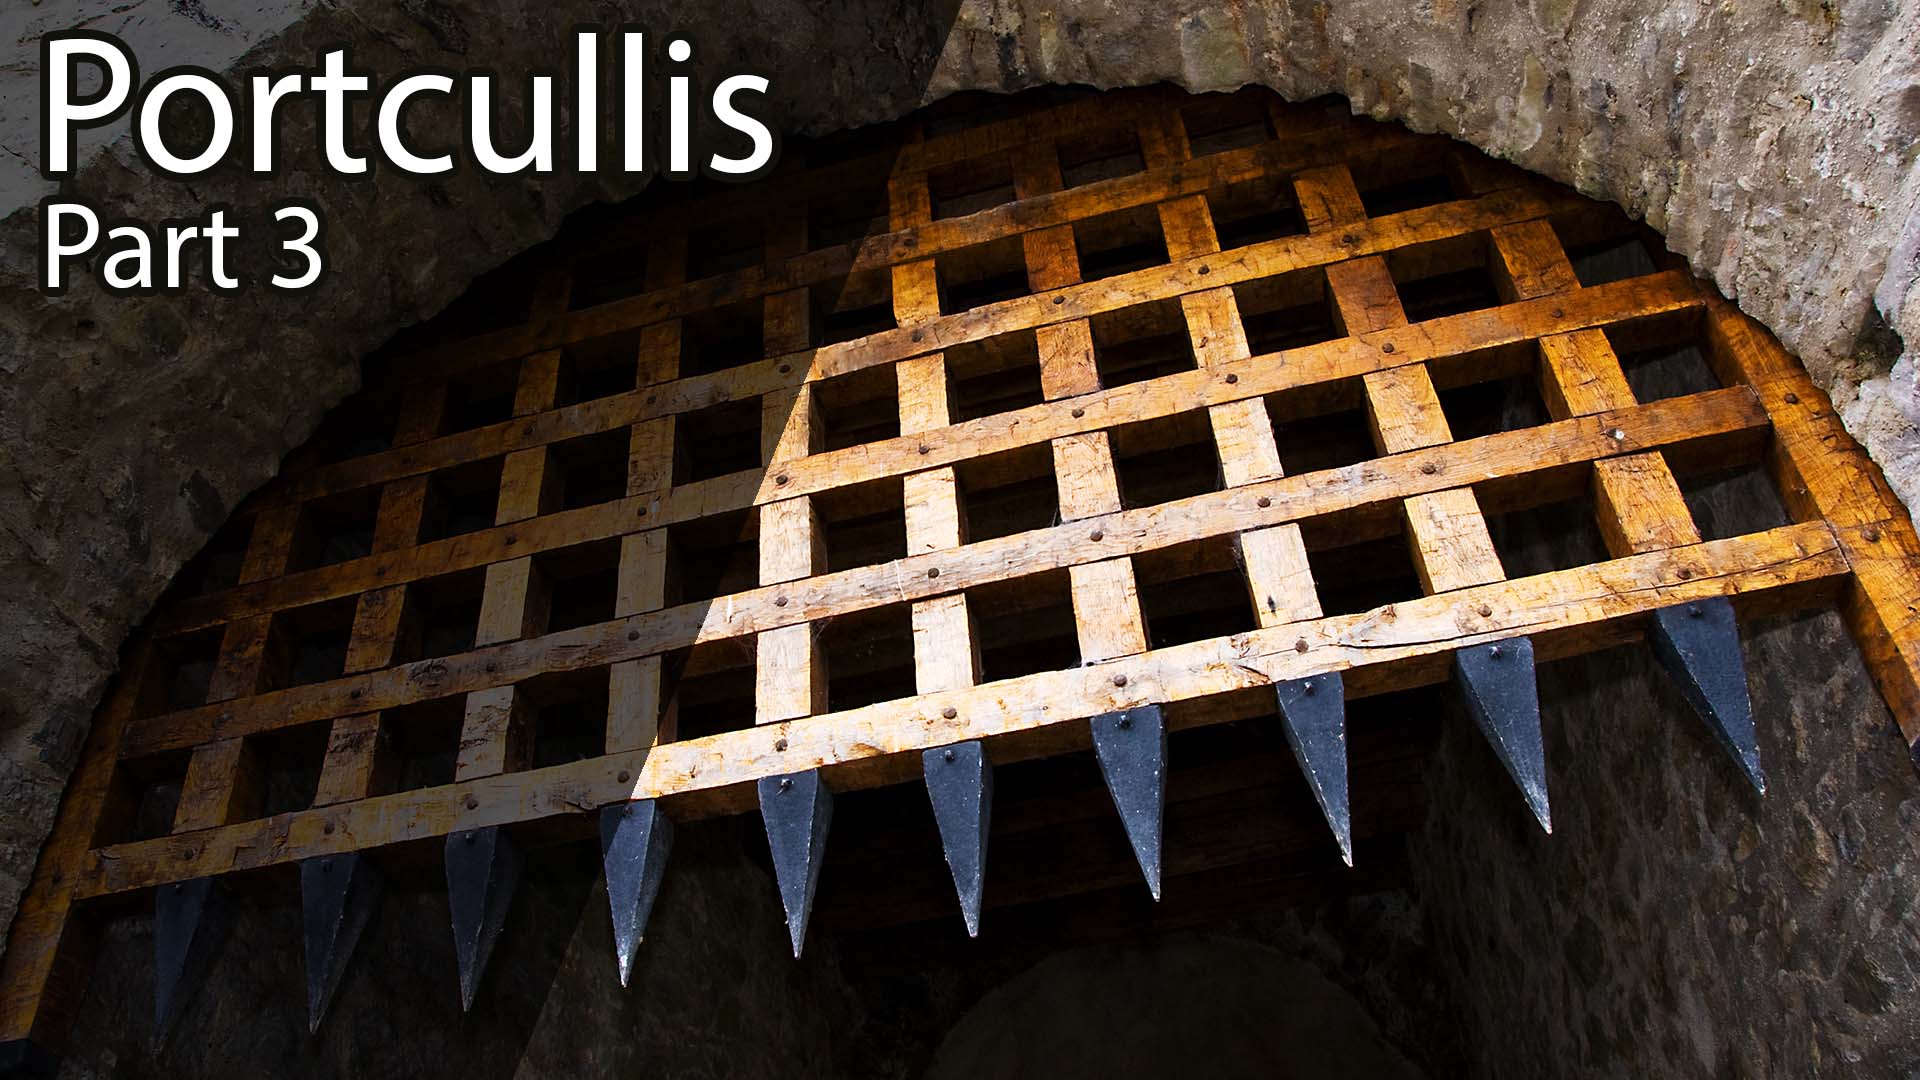 Making my first game - Portcullis (Part 3)